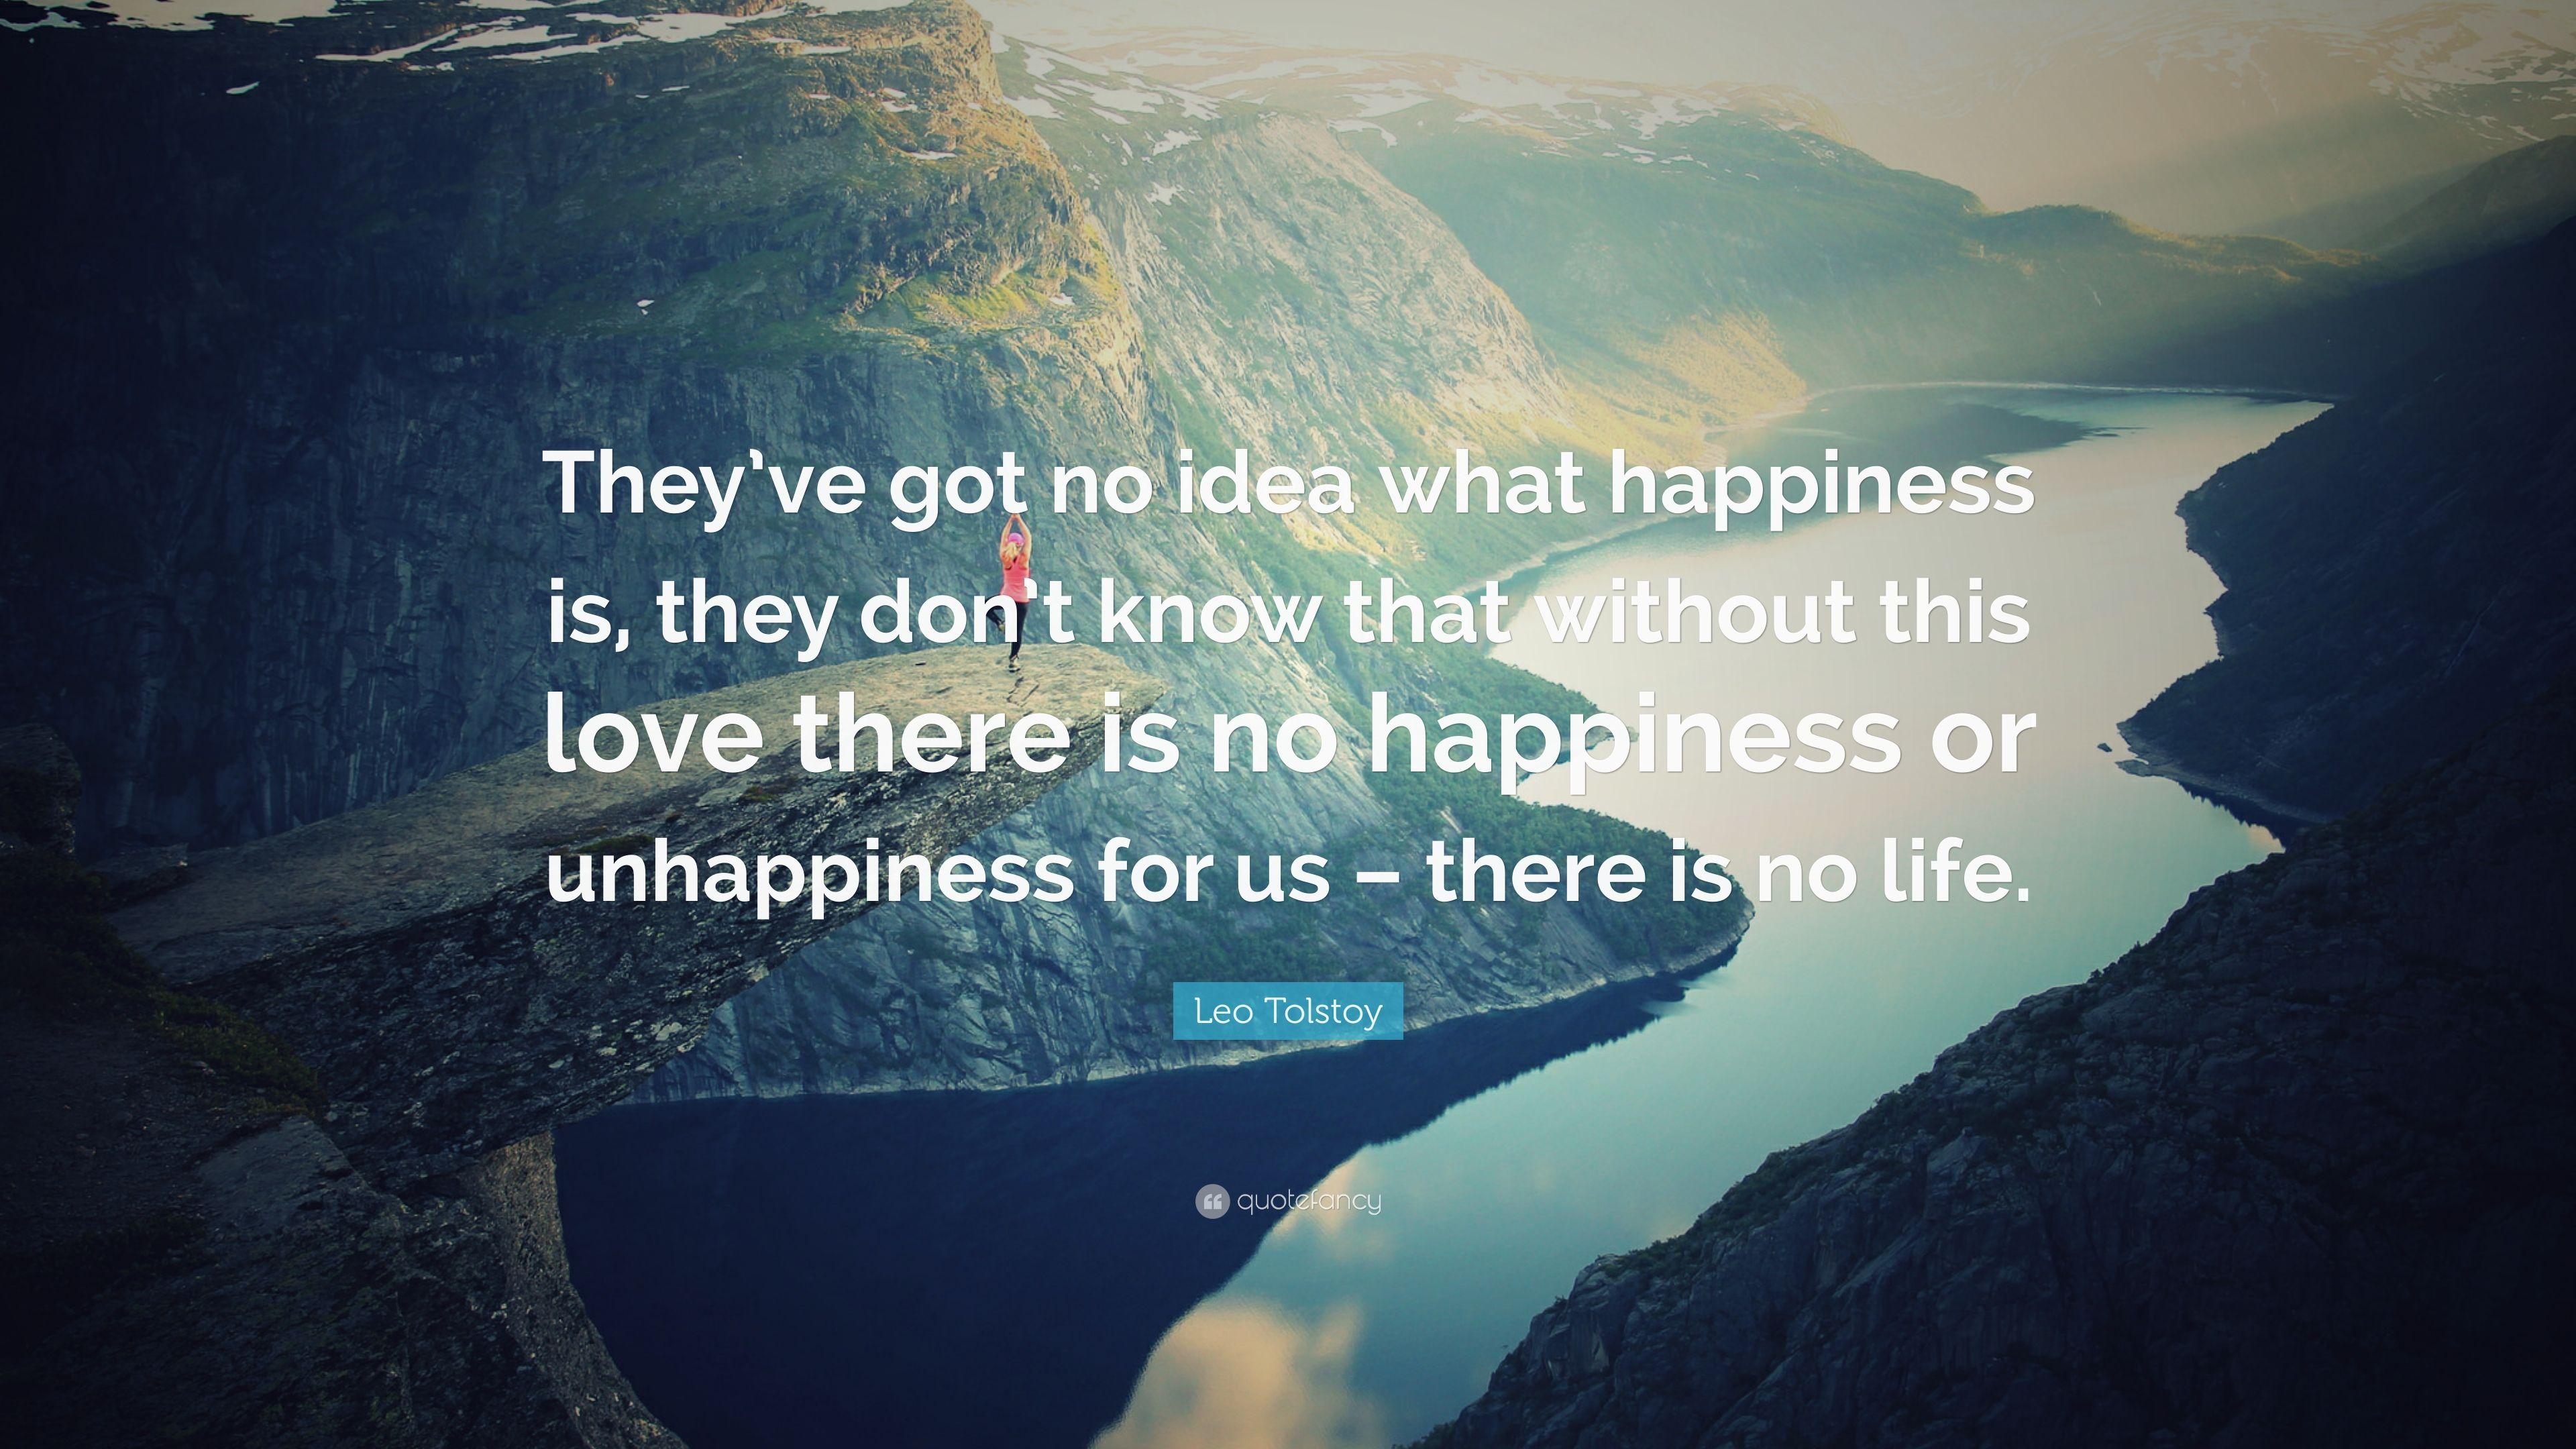 Leo Tolstoy Quote: “They've got no idea what happiness is, they don